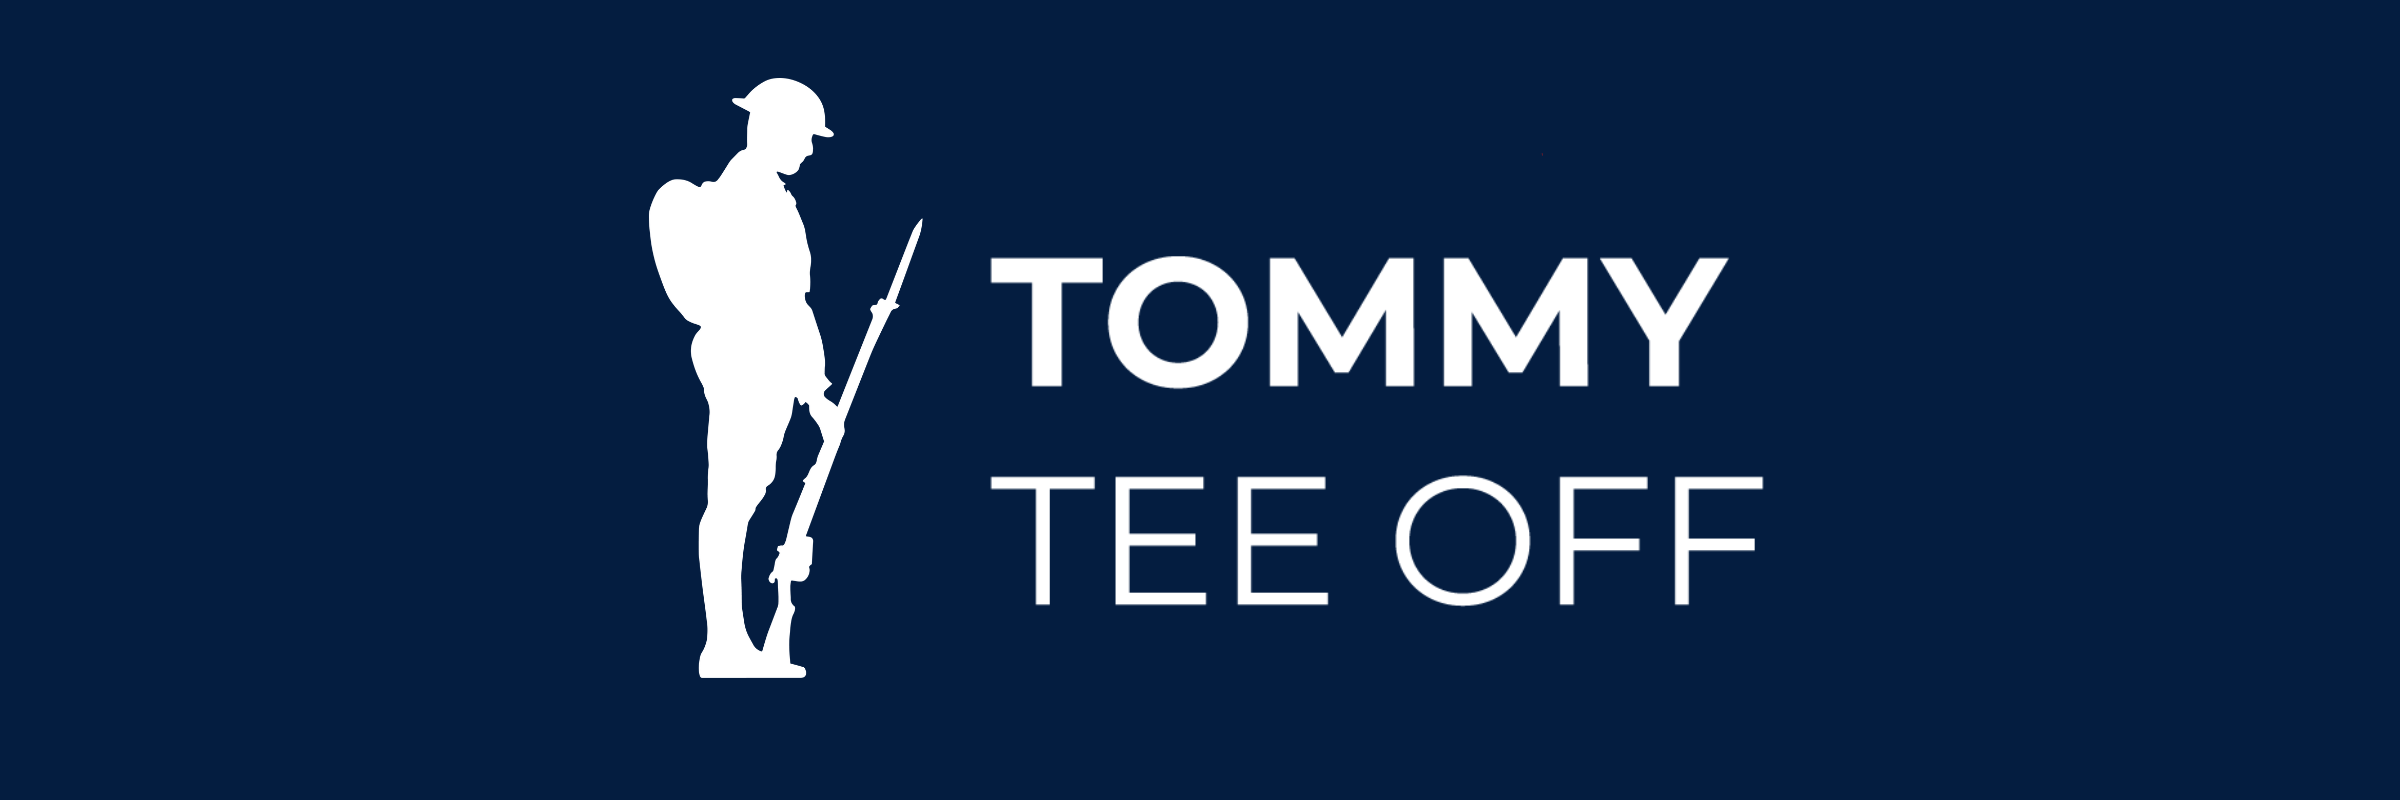 Tommy Tee Off Banner